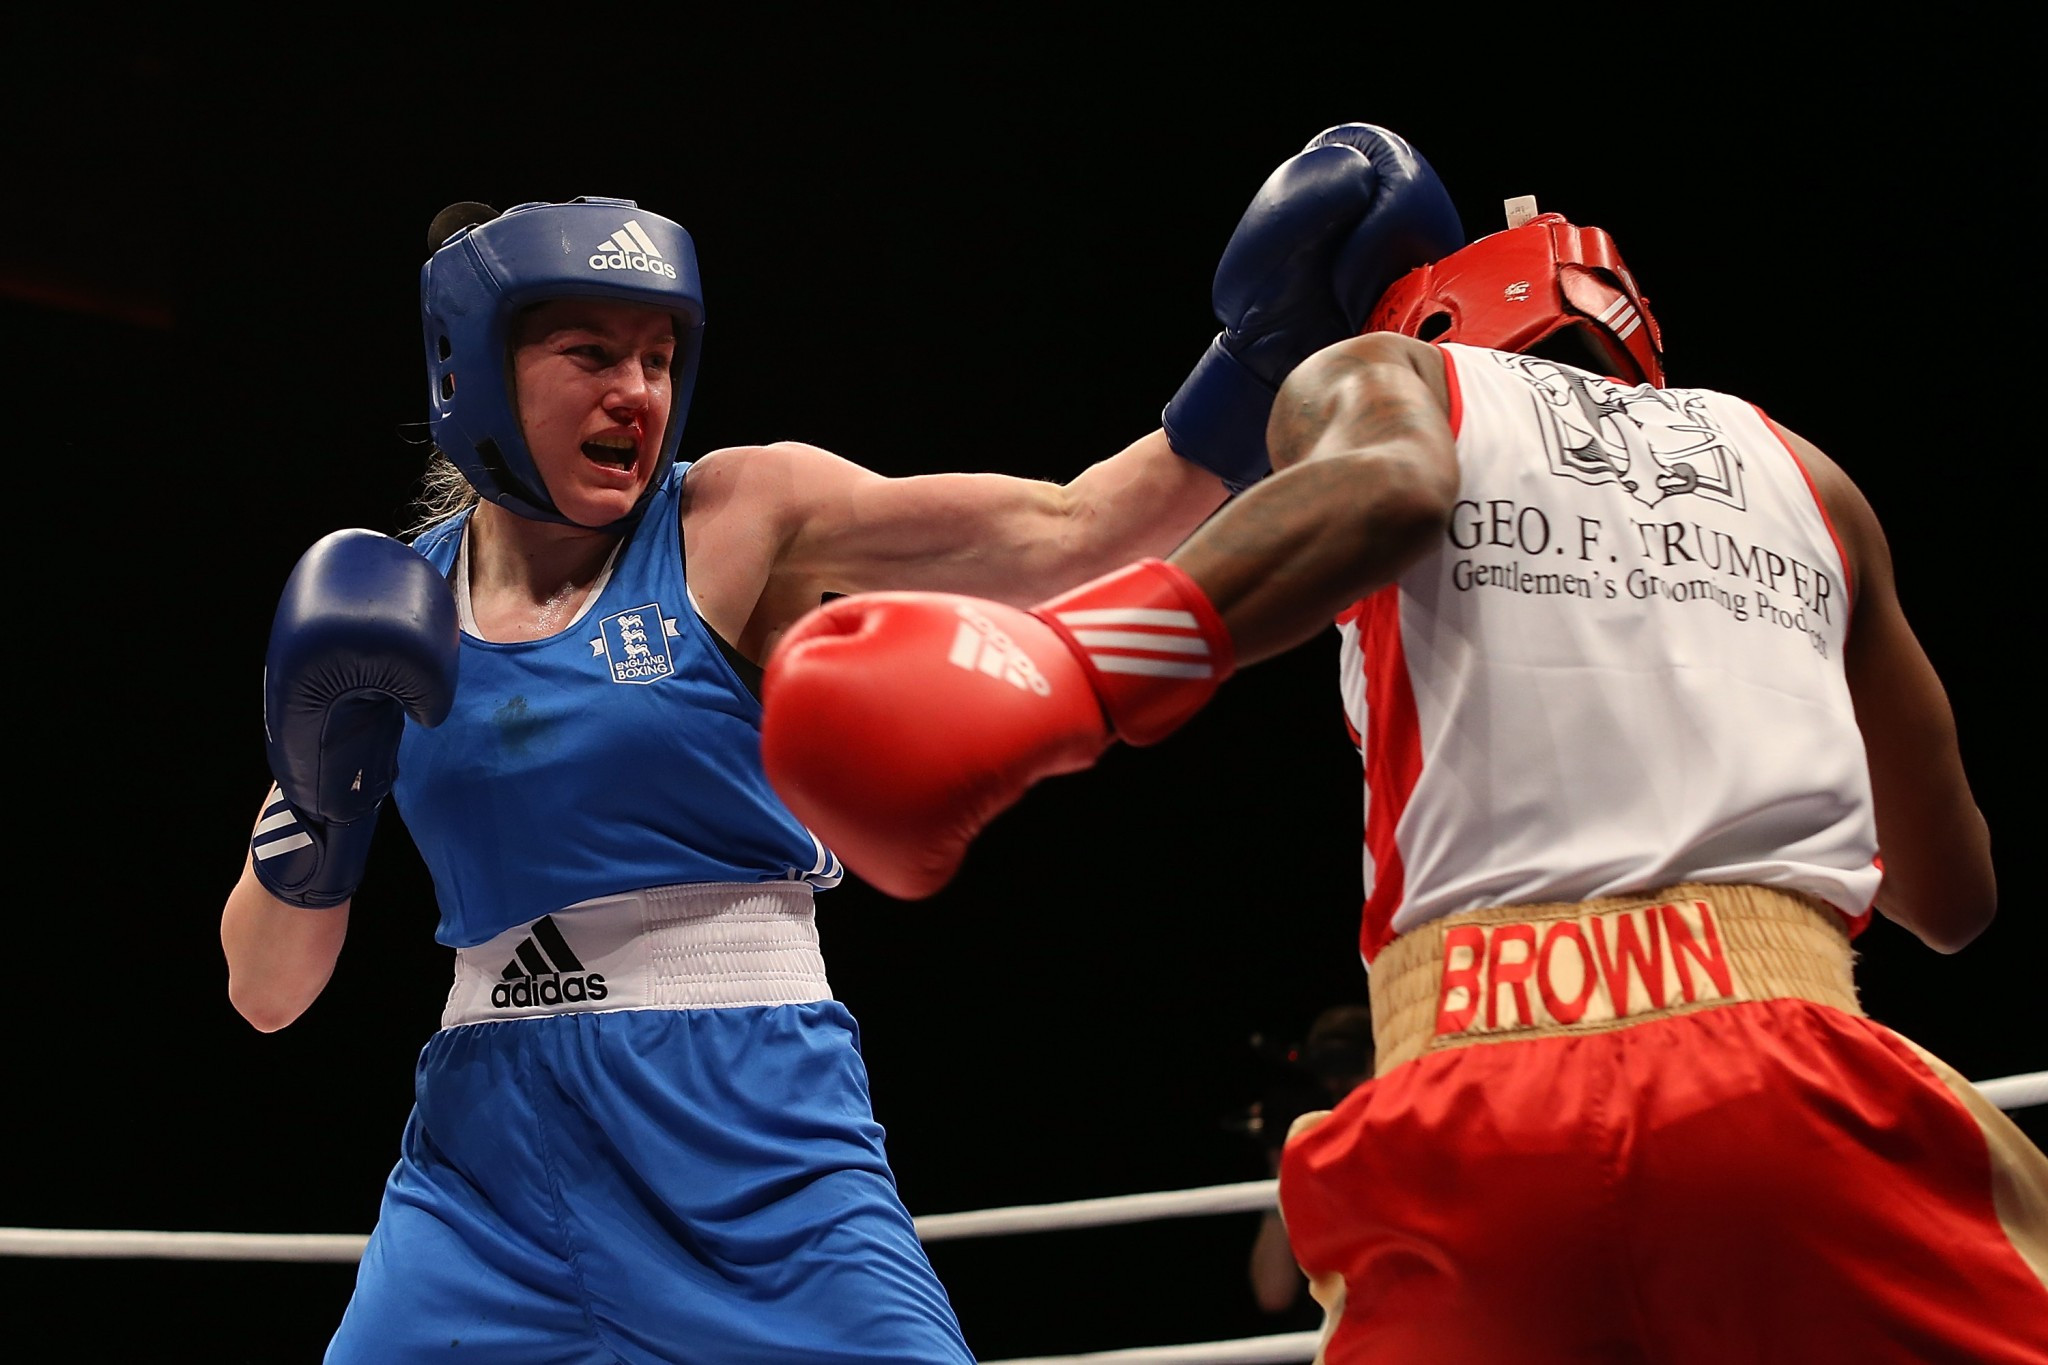 Paige Murney suffered defeat in her 64kg semi-final ©Getty Images